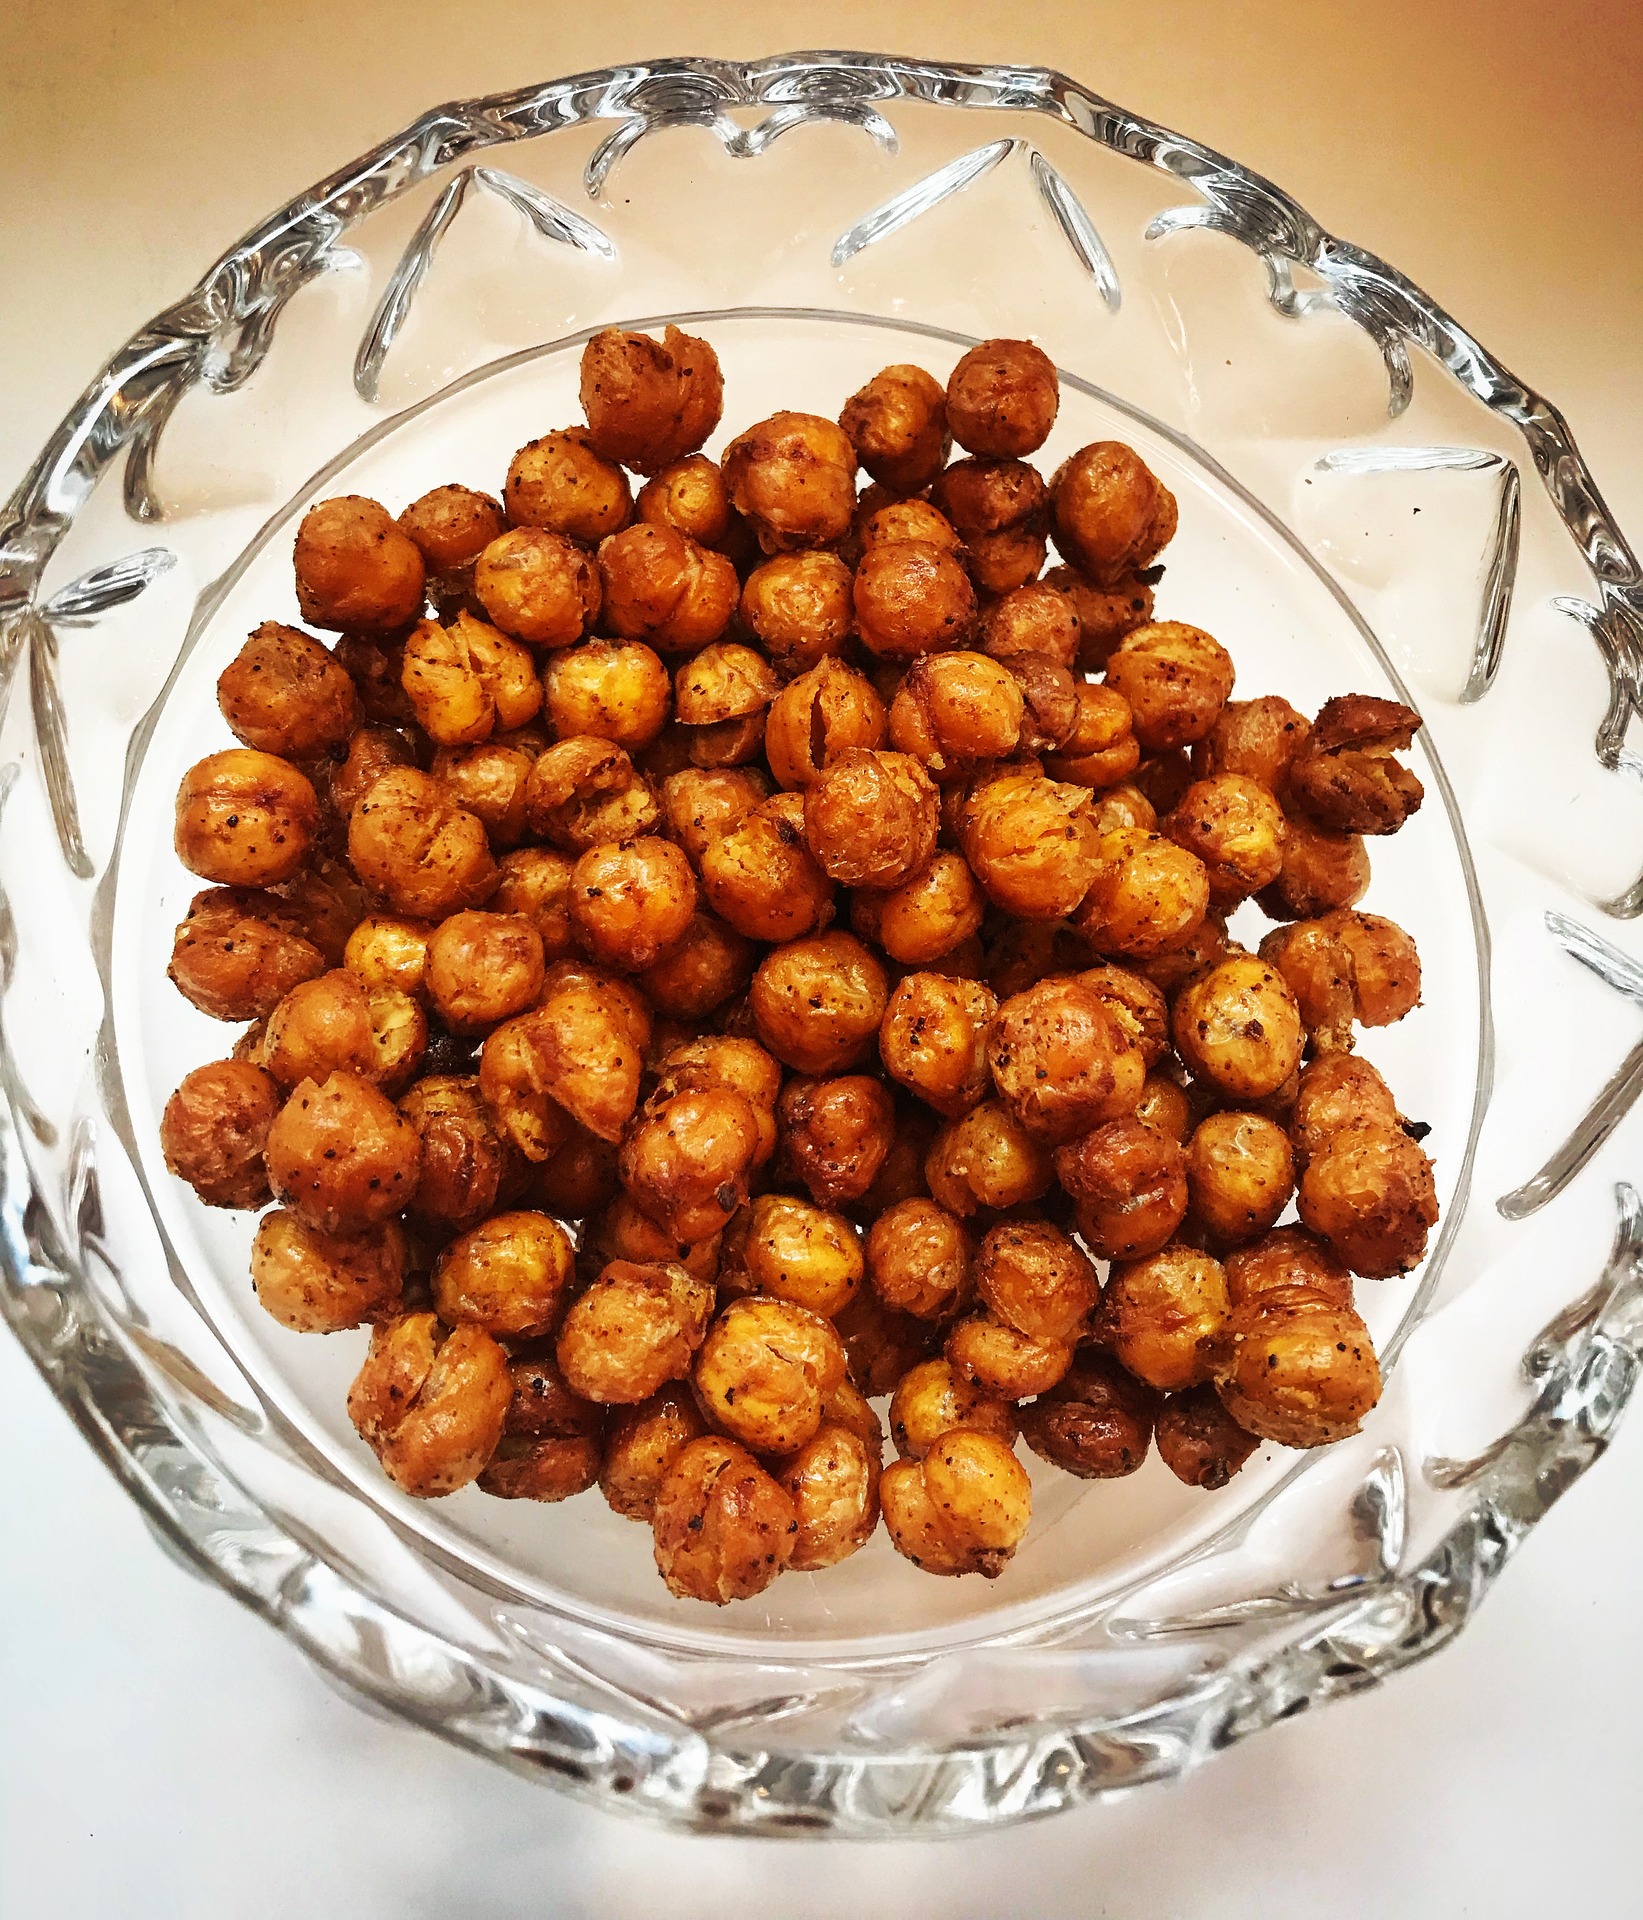 roasted chickpeas for kids while traveling